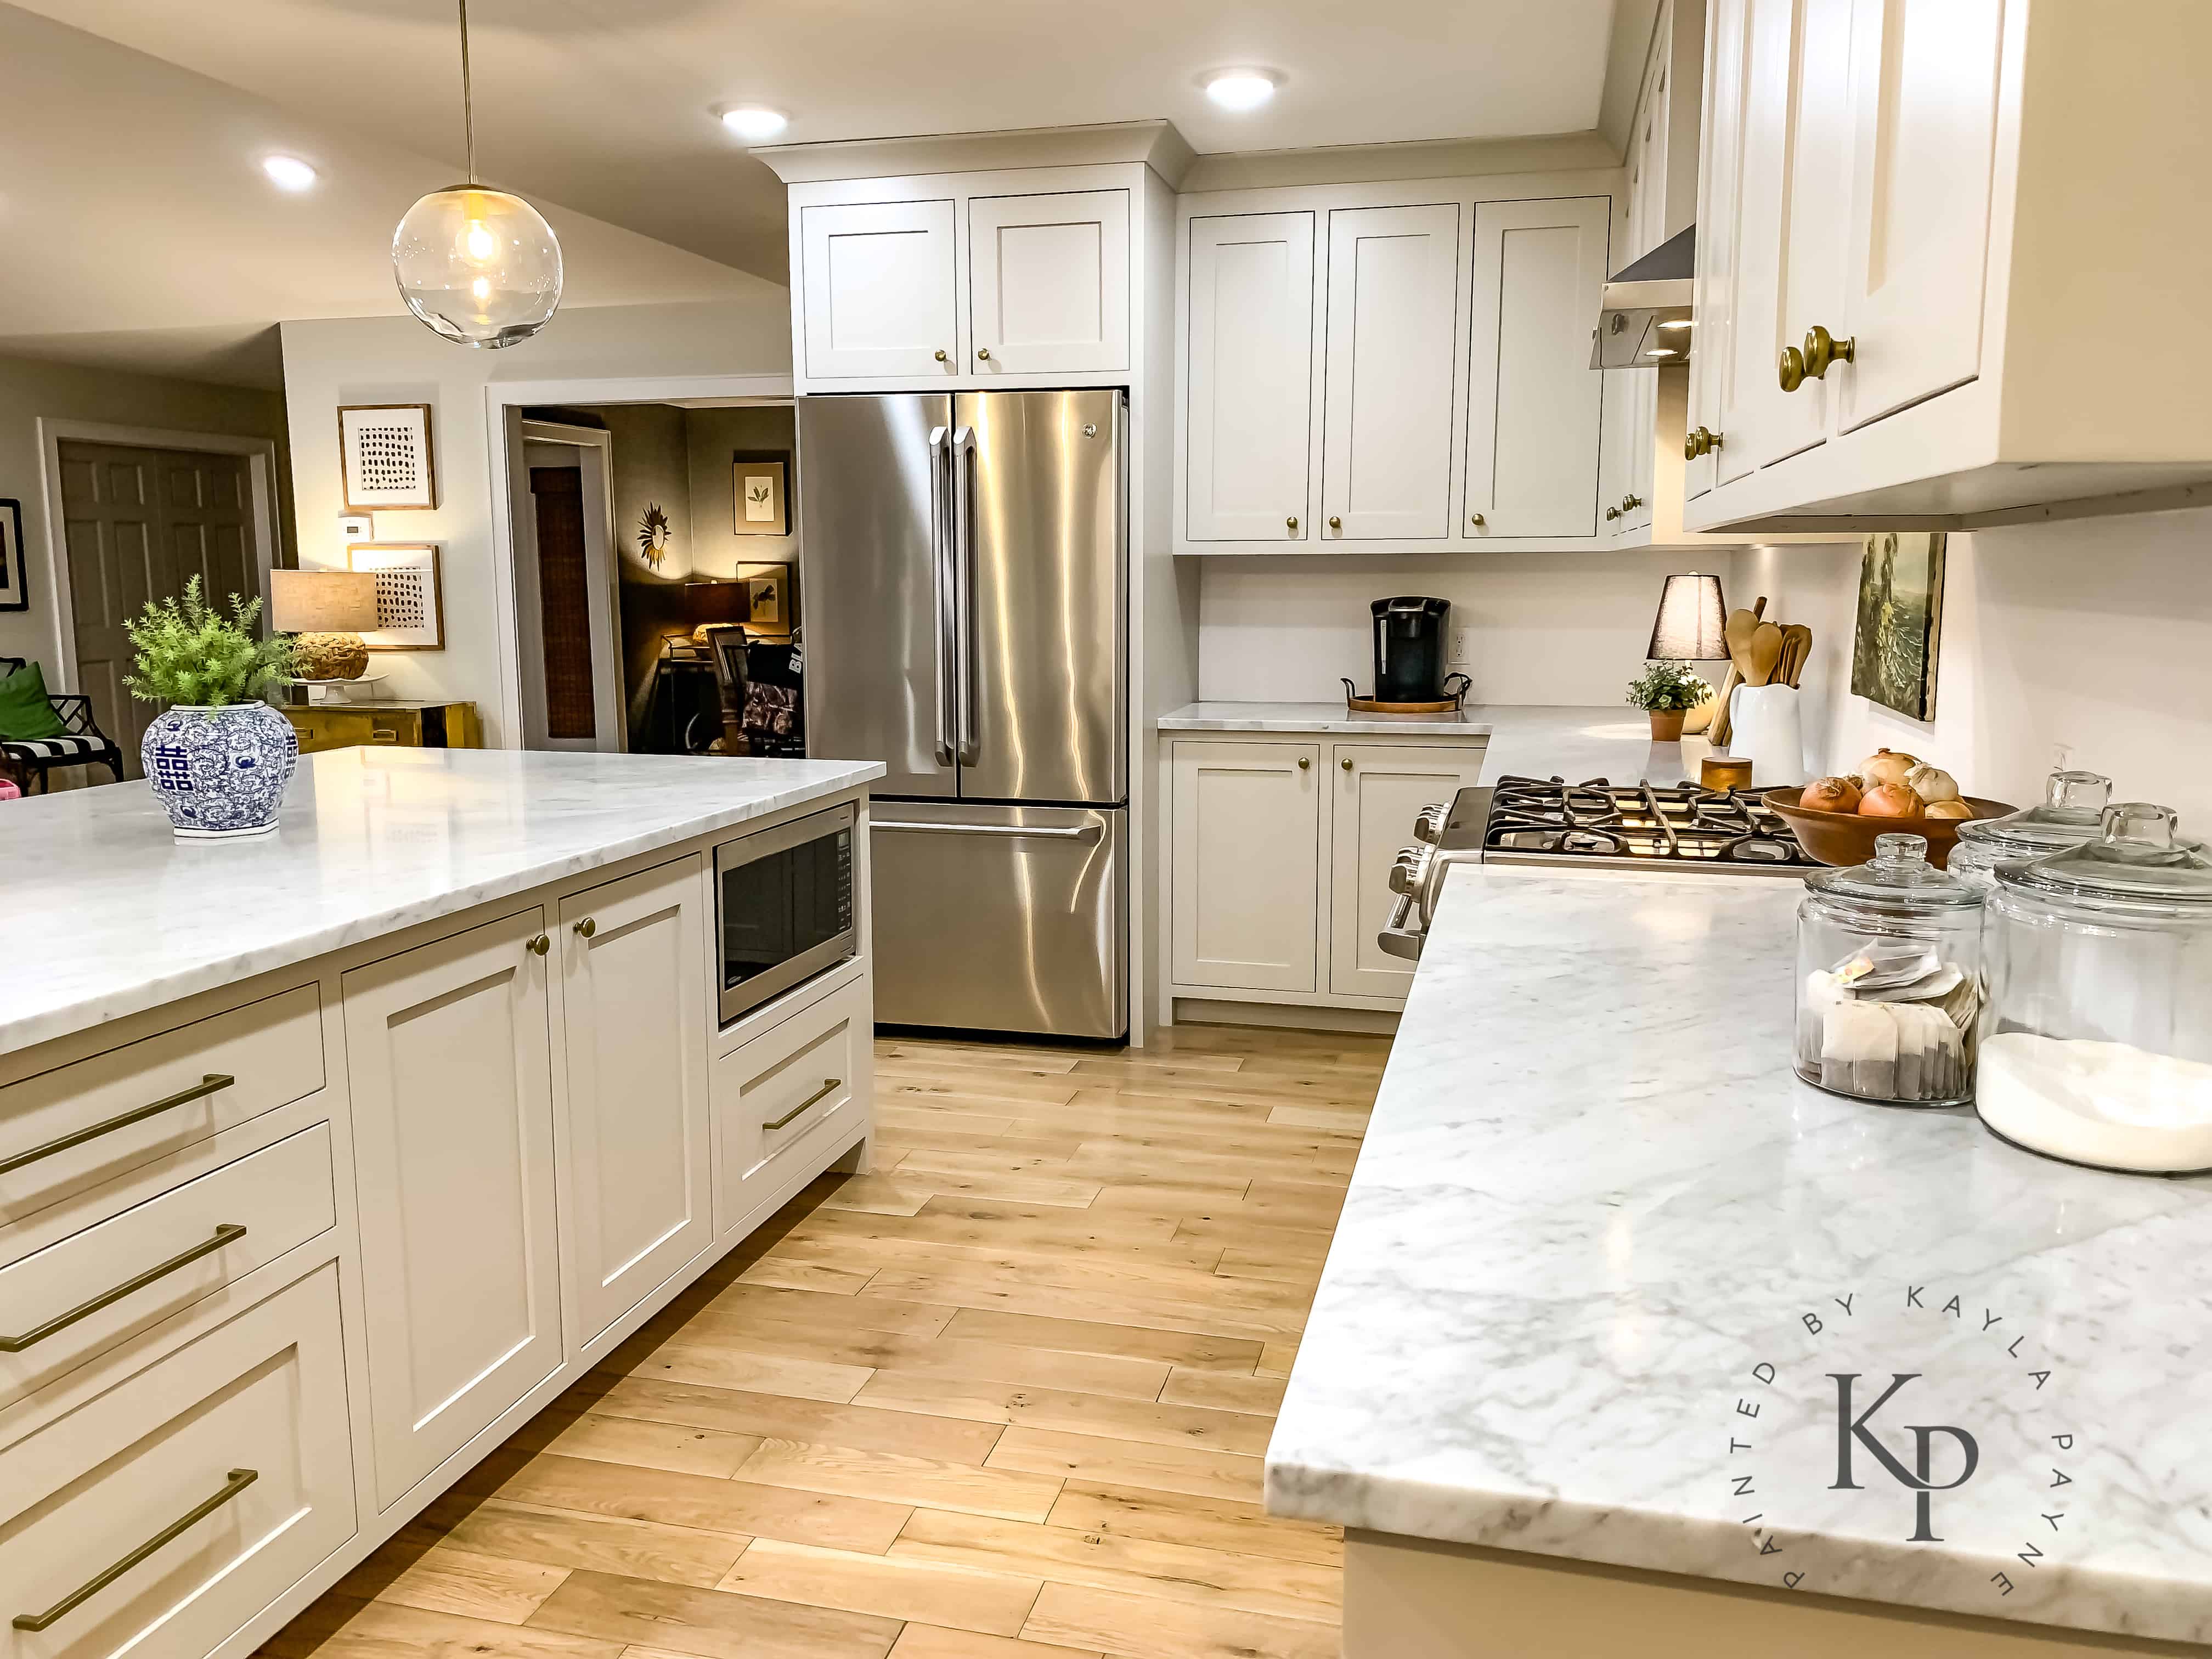 Open concept Kitchen ideas! Cabinets painted in Benjamin Moore Revere Pewter with Carrara Marble countertops.